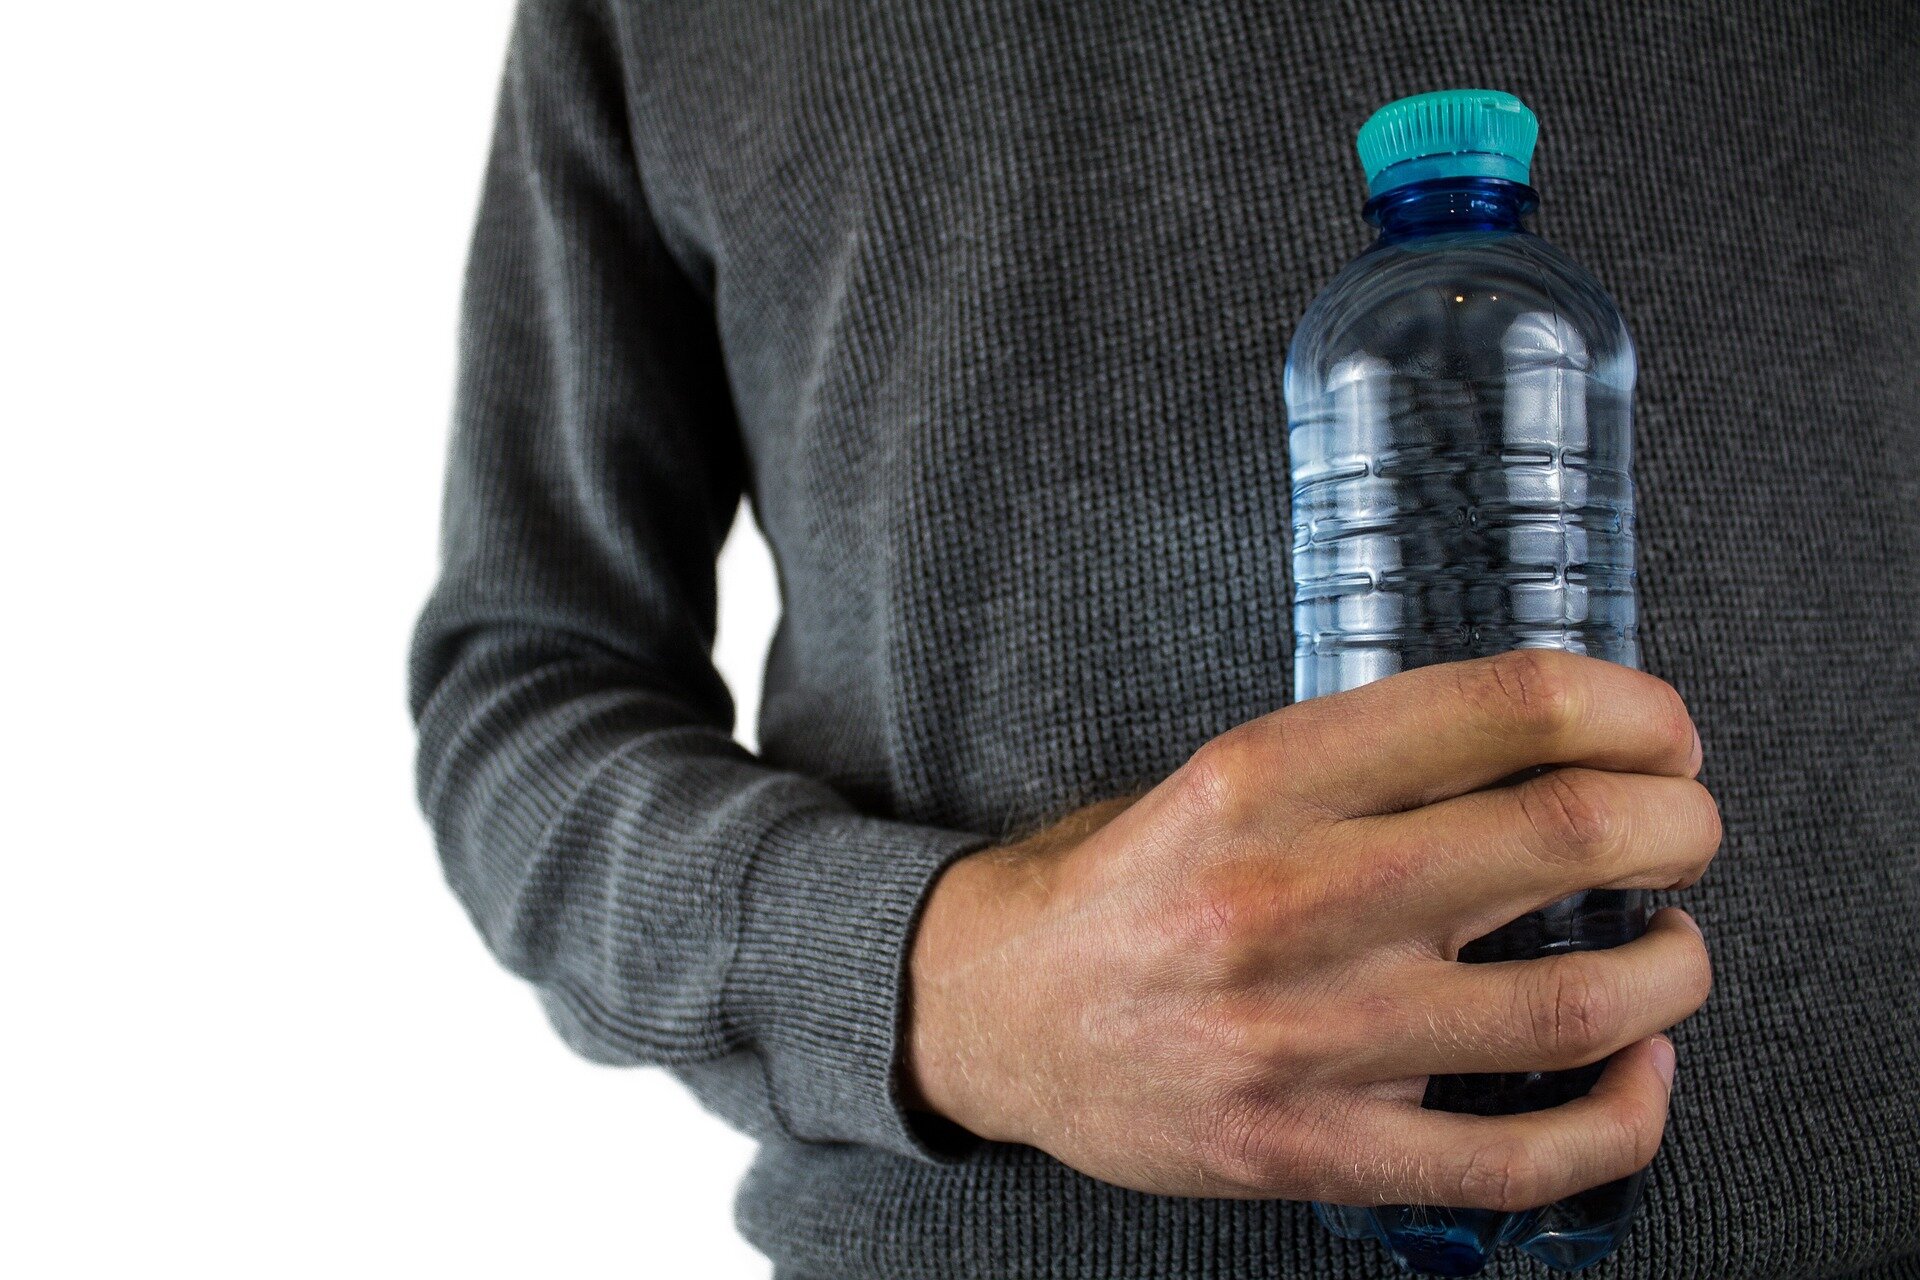 Long-Term Exposure to Nitrate in Drinking Water May Be a Risk Factor for Prostate Cancer